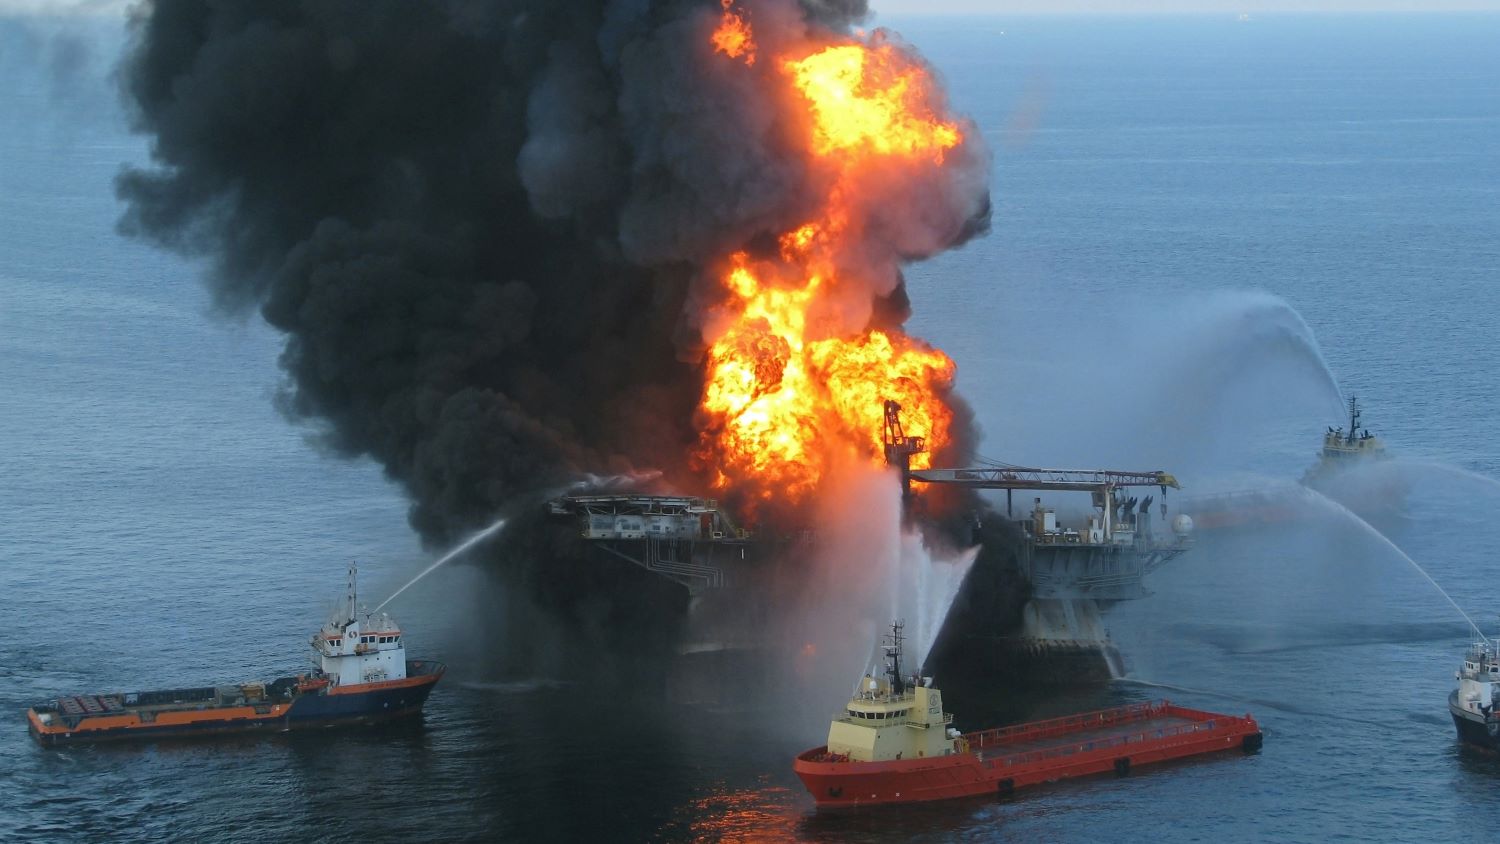 How will we deal with oil spills in the future?